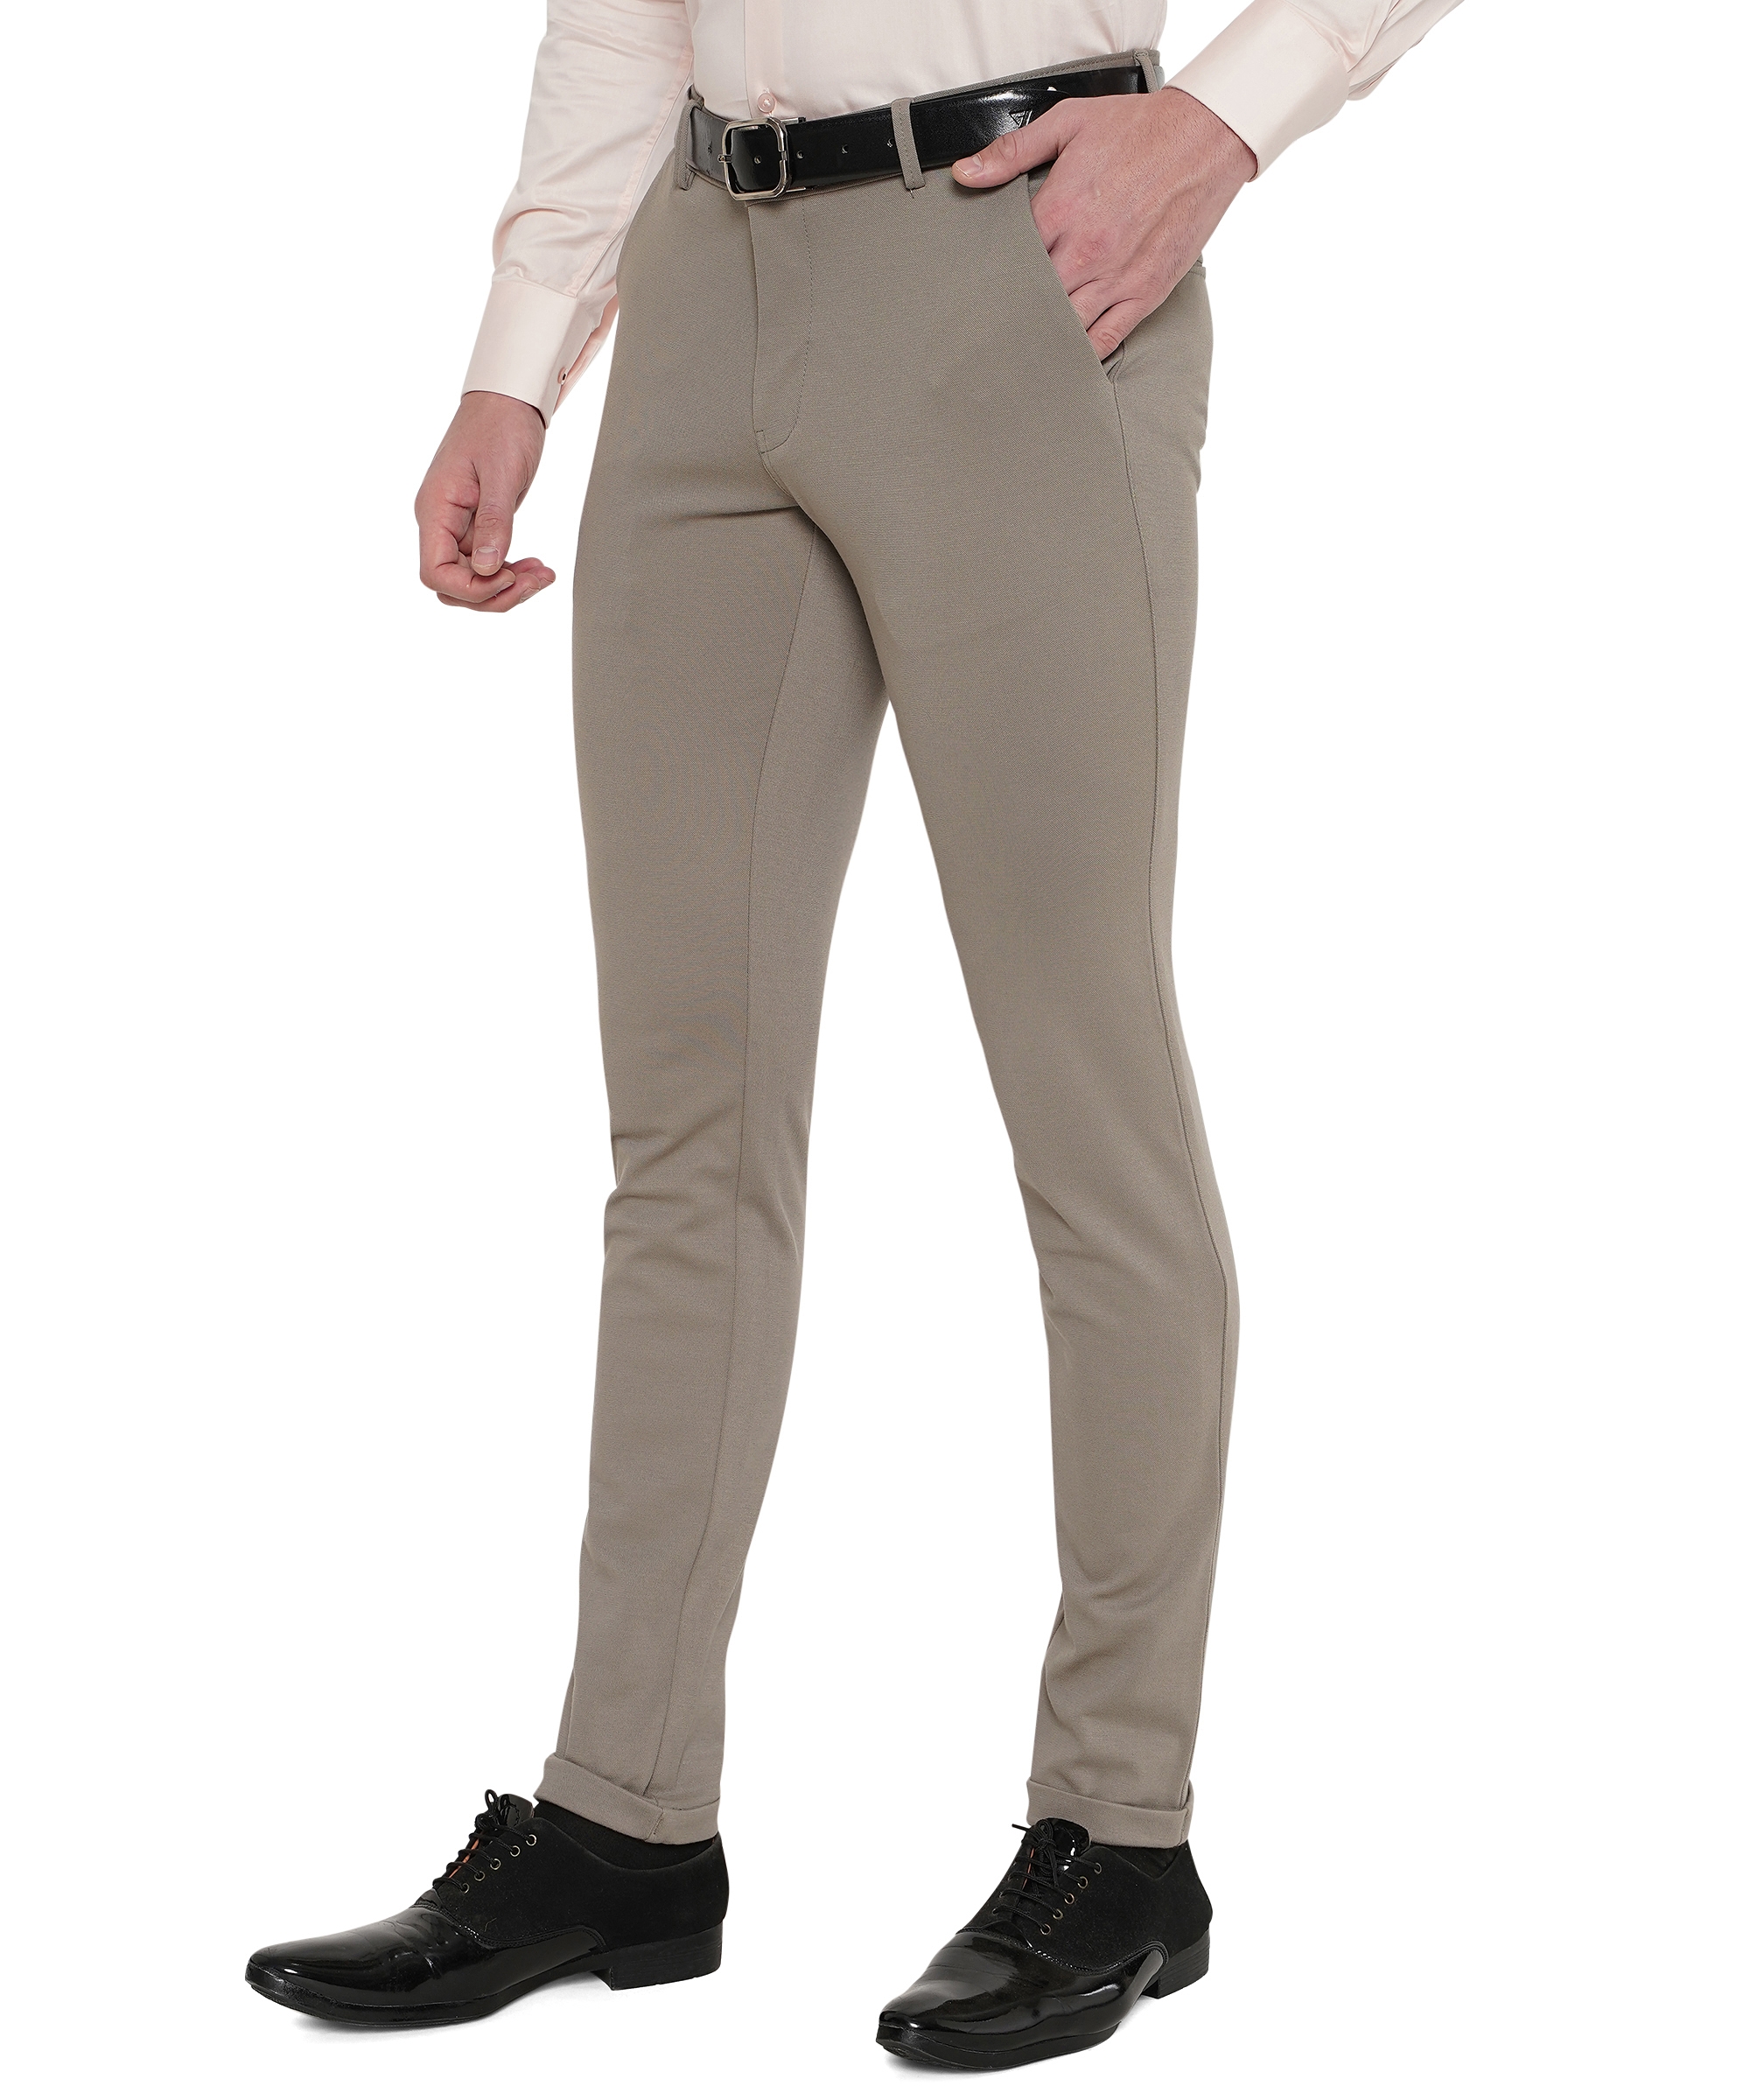 Buy FOUR SQUARE Slim Fit Cream Formal Trouser for Men - Polyester Viscose  Bottom Formal Pants for Gents - Office Formal Pants for Men - 36 at  Amazon.in